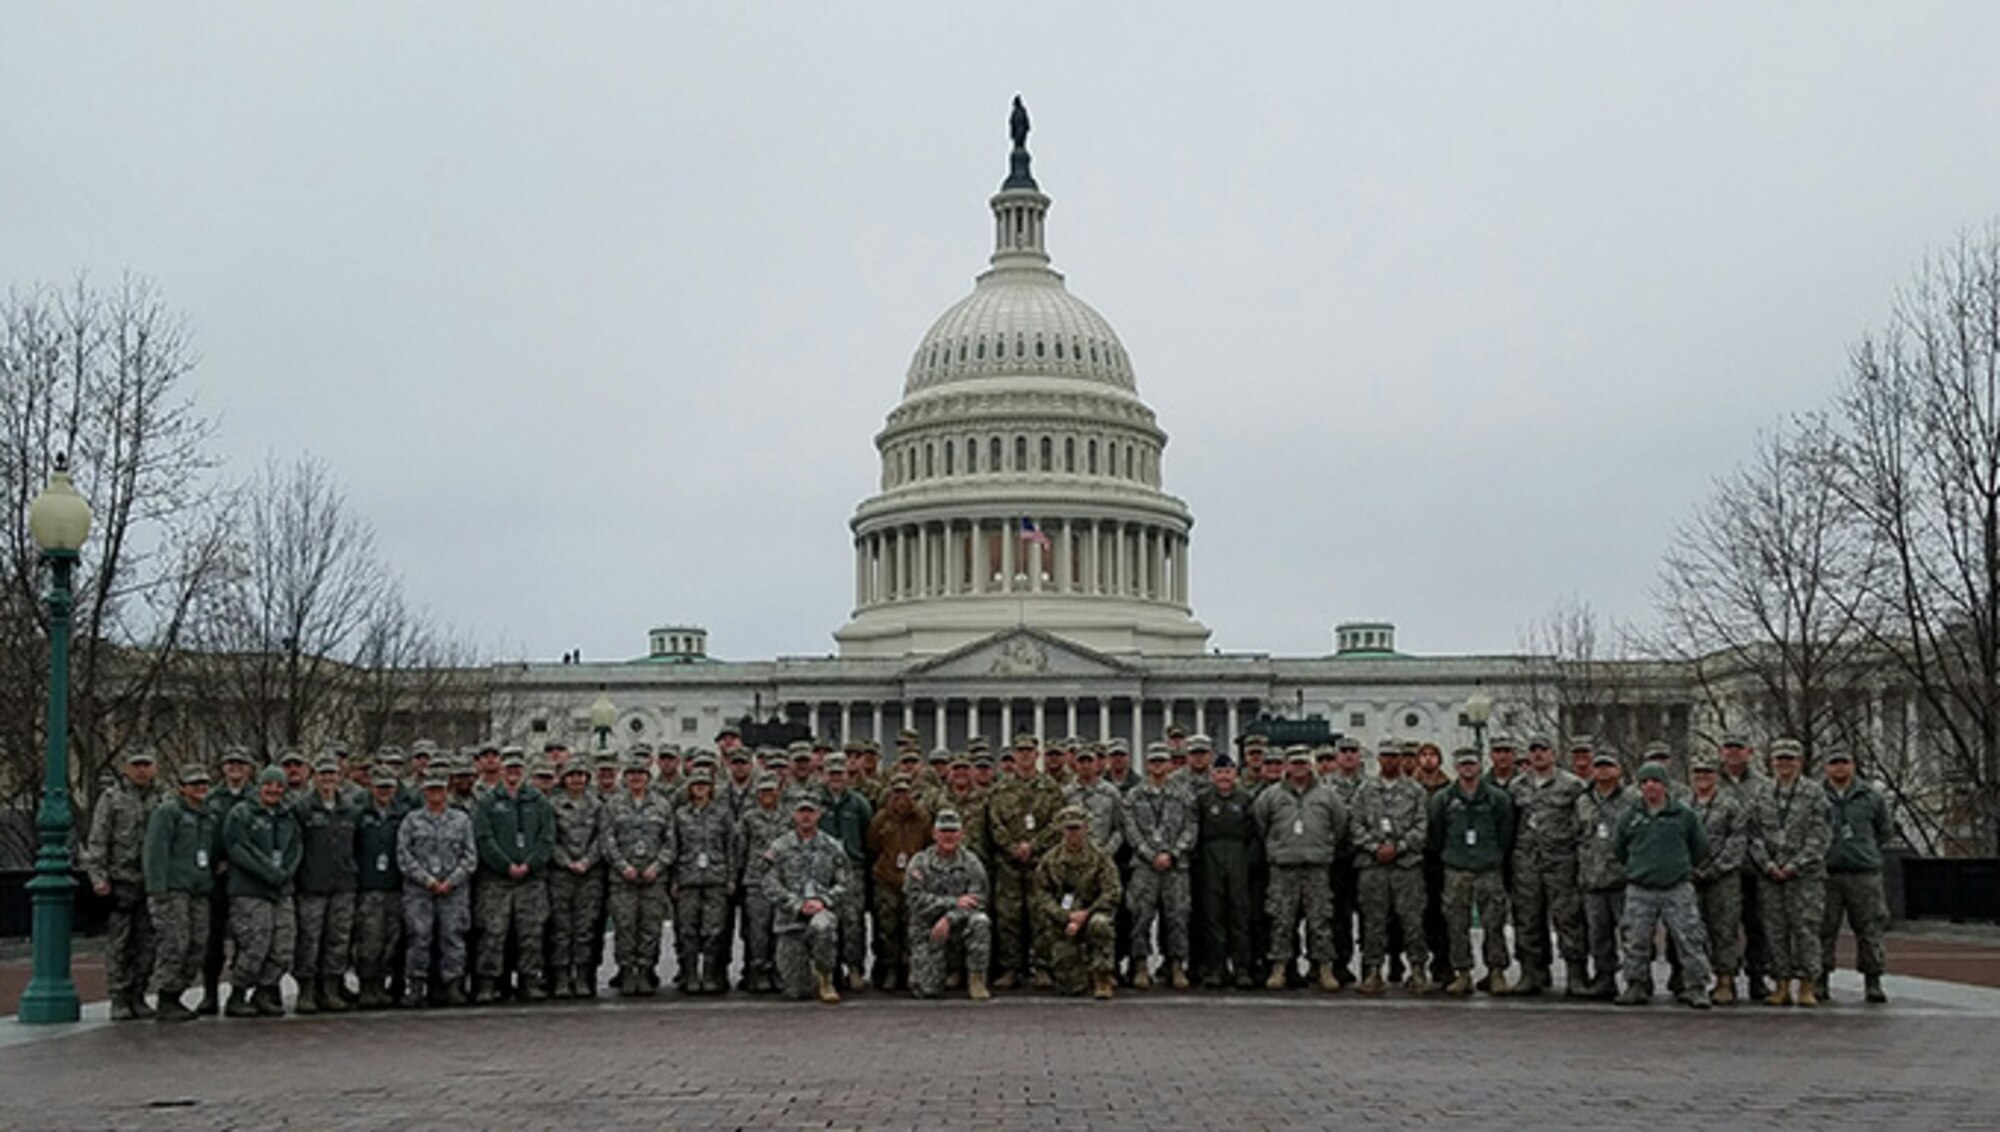 Airmen and Soldiers from the West Virginia National Guard specialized units, including the Chemical, Biological, Radiological, Nuclear and high yield Explosive, or CBRNE, Enhanced Response Force Package (CERFP), ANG Fatality & Services Recovery Response Team (FRST) and the Joint Incident Site Communications Capability (JISCC), deployed in support of tthe 58th Presidential Inauguration, Washington, D.C., January 20, 2017.